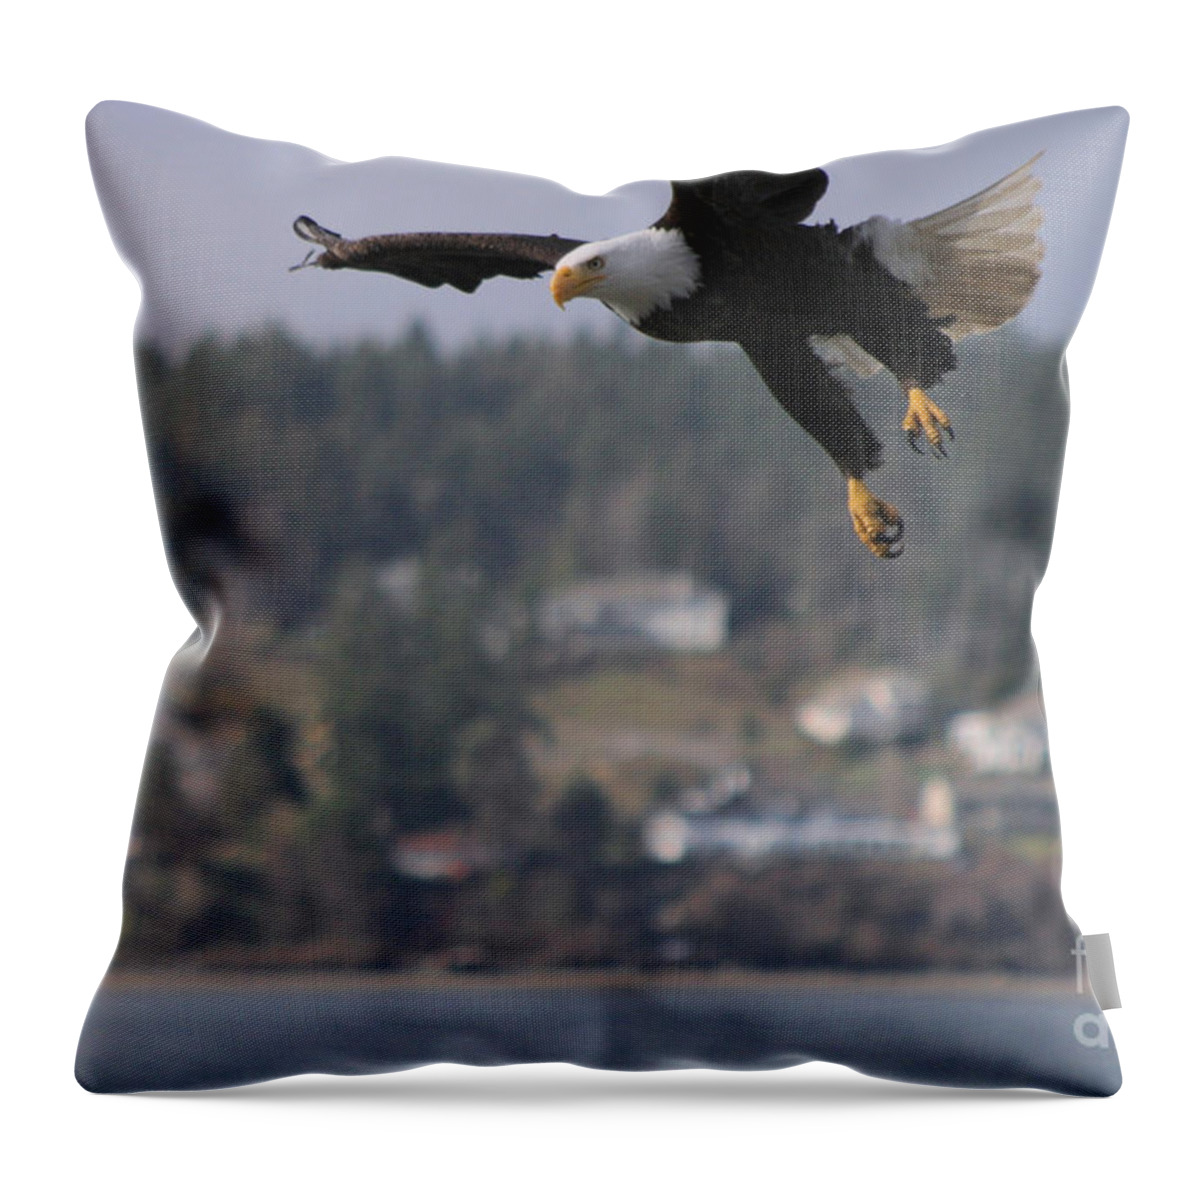 Animals Throw Pillow featuring the photograph I'm Coming In For A Landing by Kym Backland